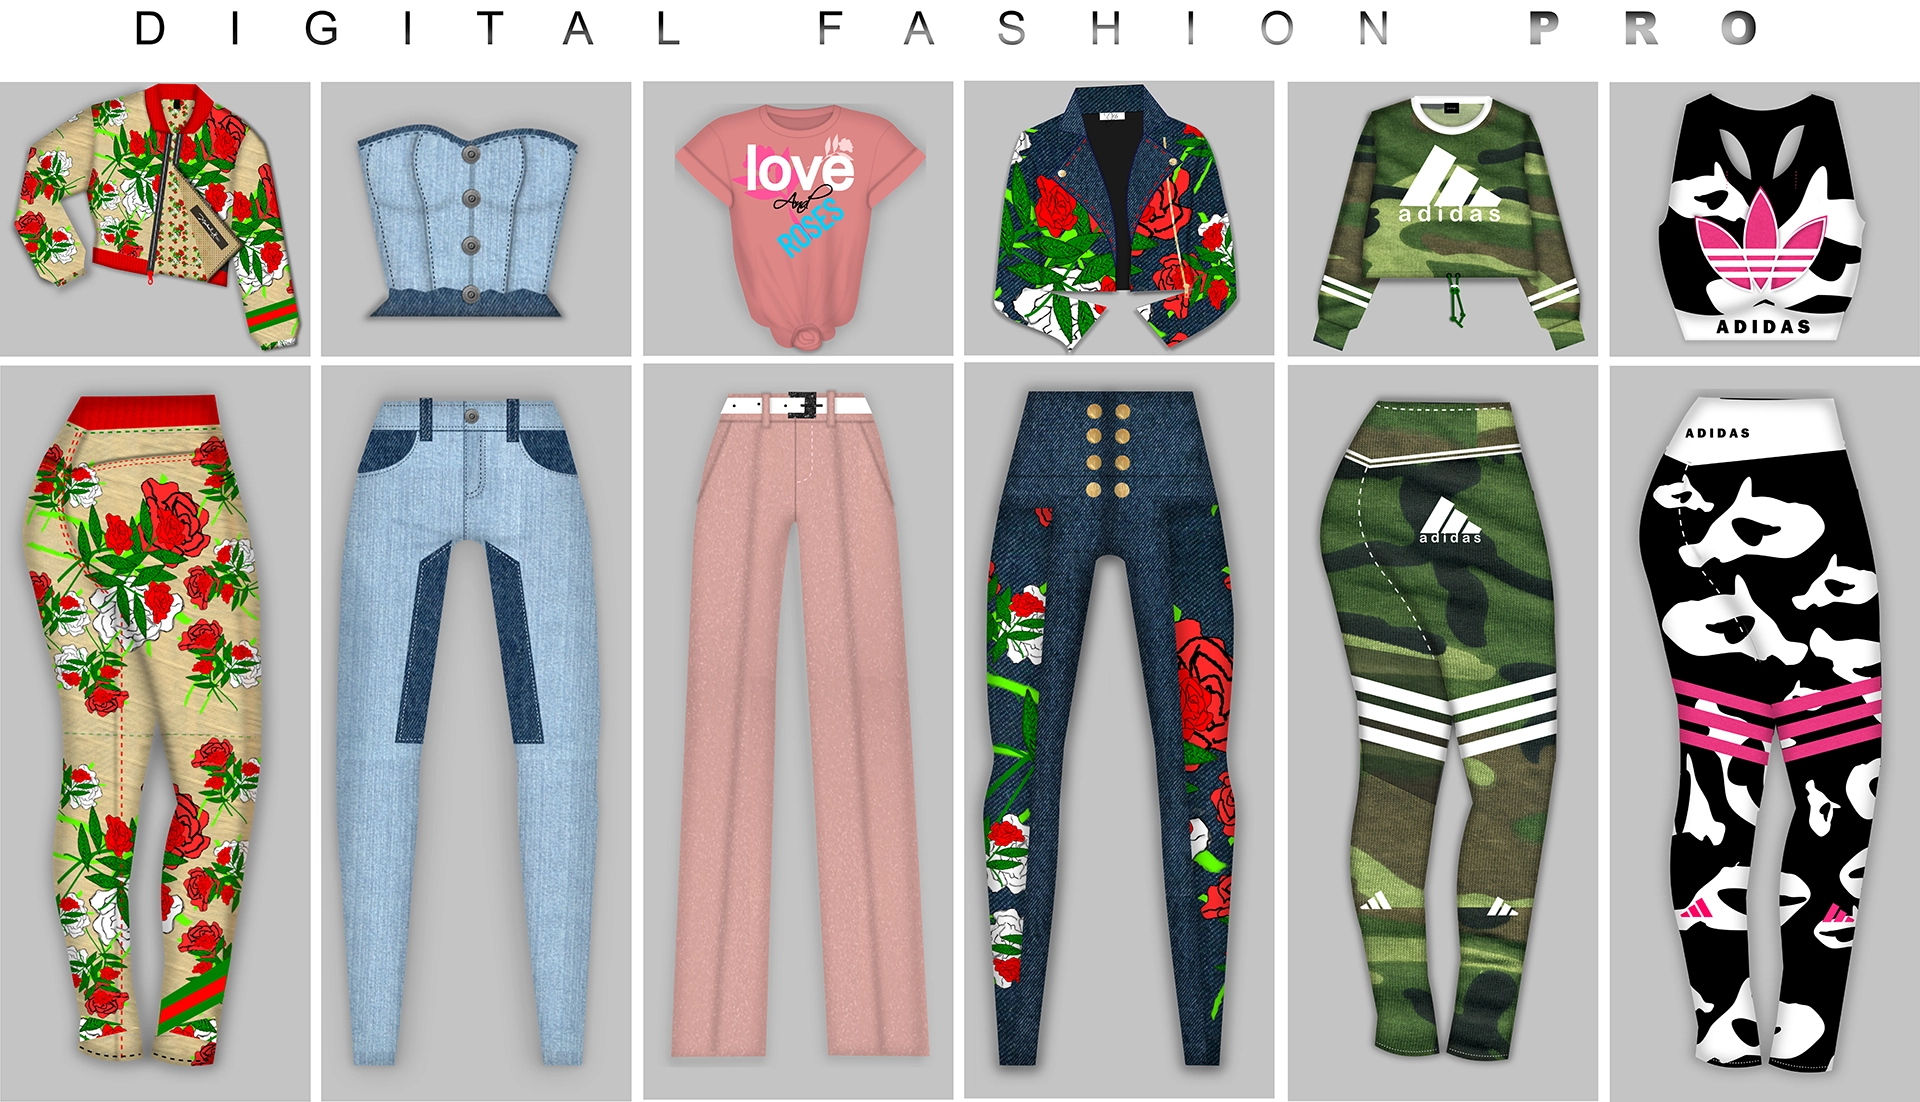 Outfits and looks - design your own clothing with Digital Fashion Pro Clothing Design Software